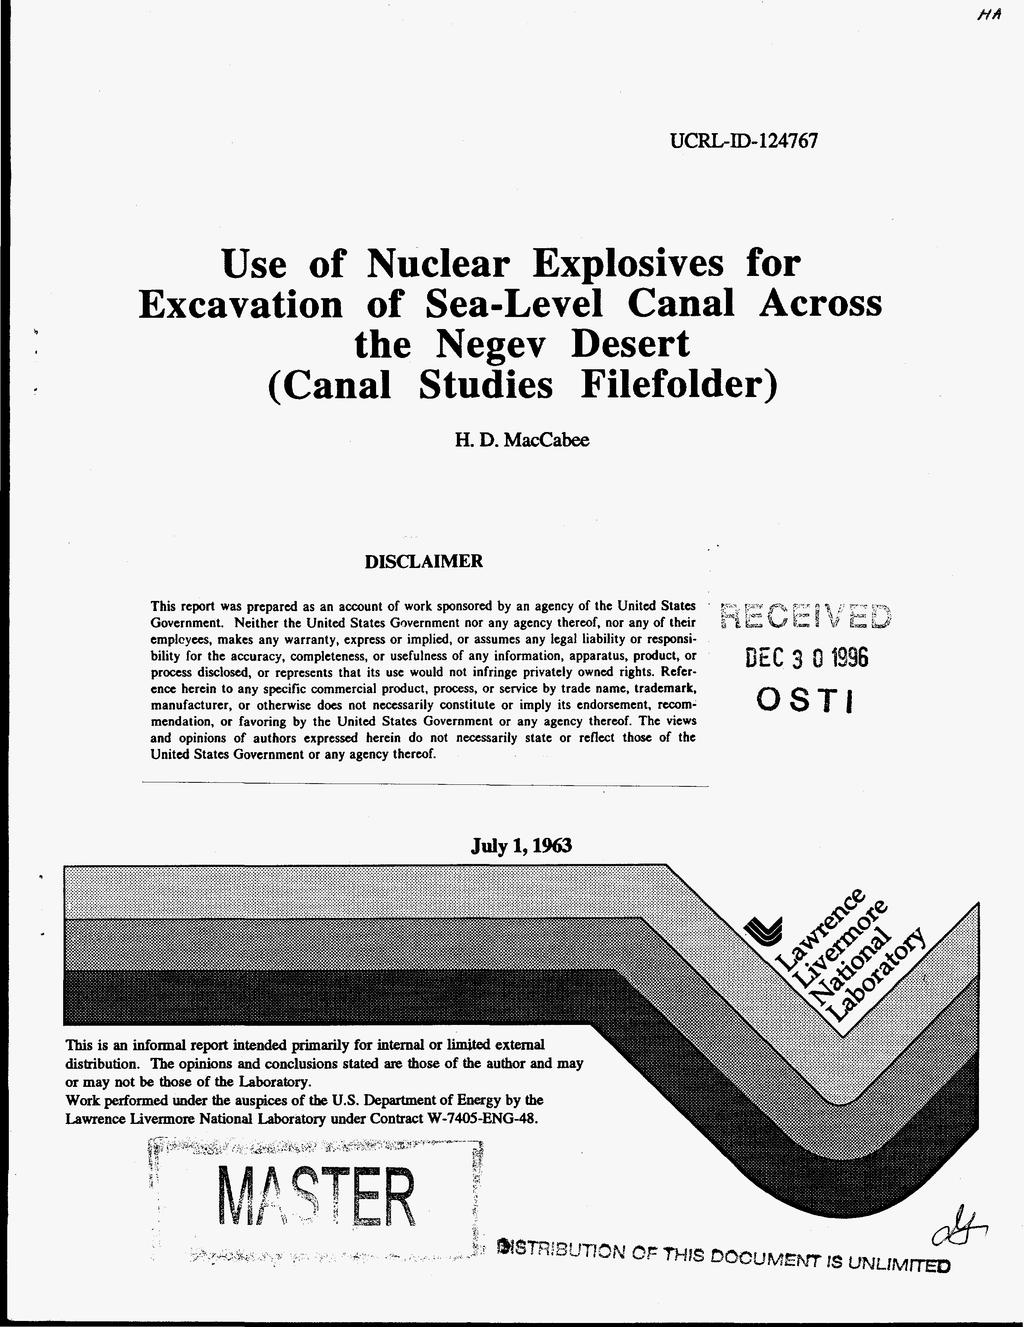 UCRL-ID-12477 Use of Nuclear Explosives for Excavation of Sea-Level Canal Across the Negev Desert (Canal Studies Filefolder) H.D. MacCabee DISCLAIMER This report was prepared as an account of work sponsored by an agency of the United States Government.